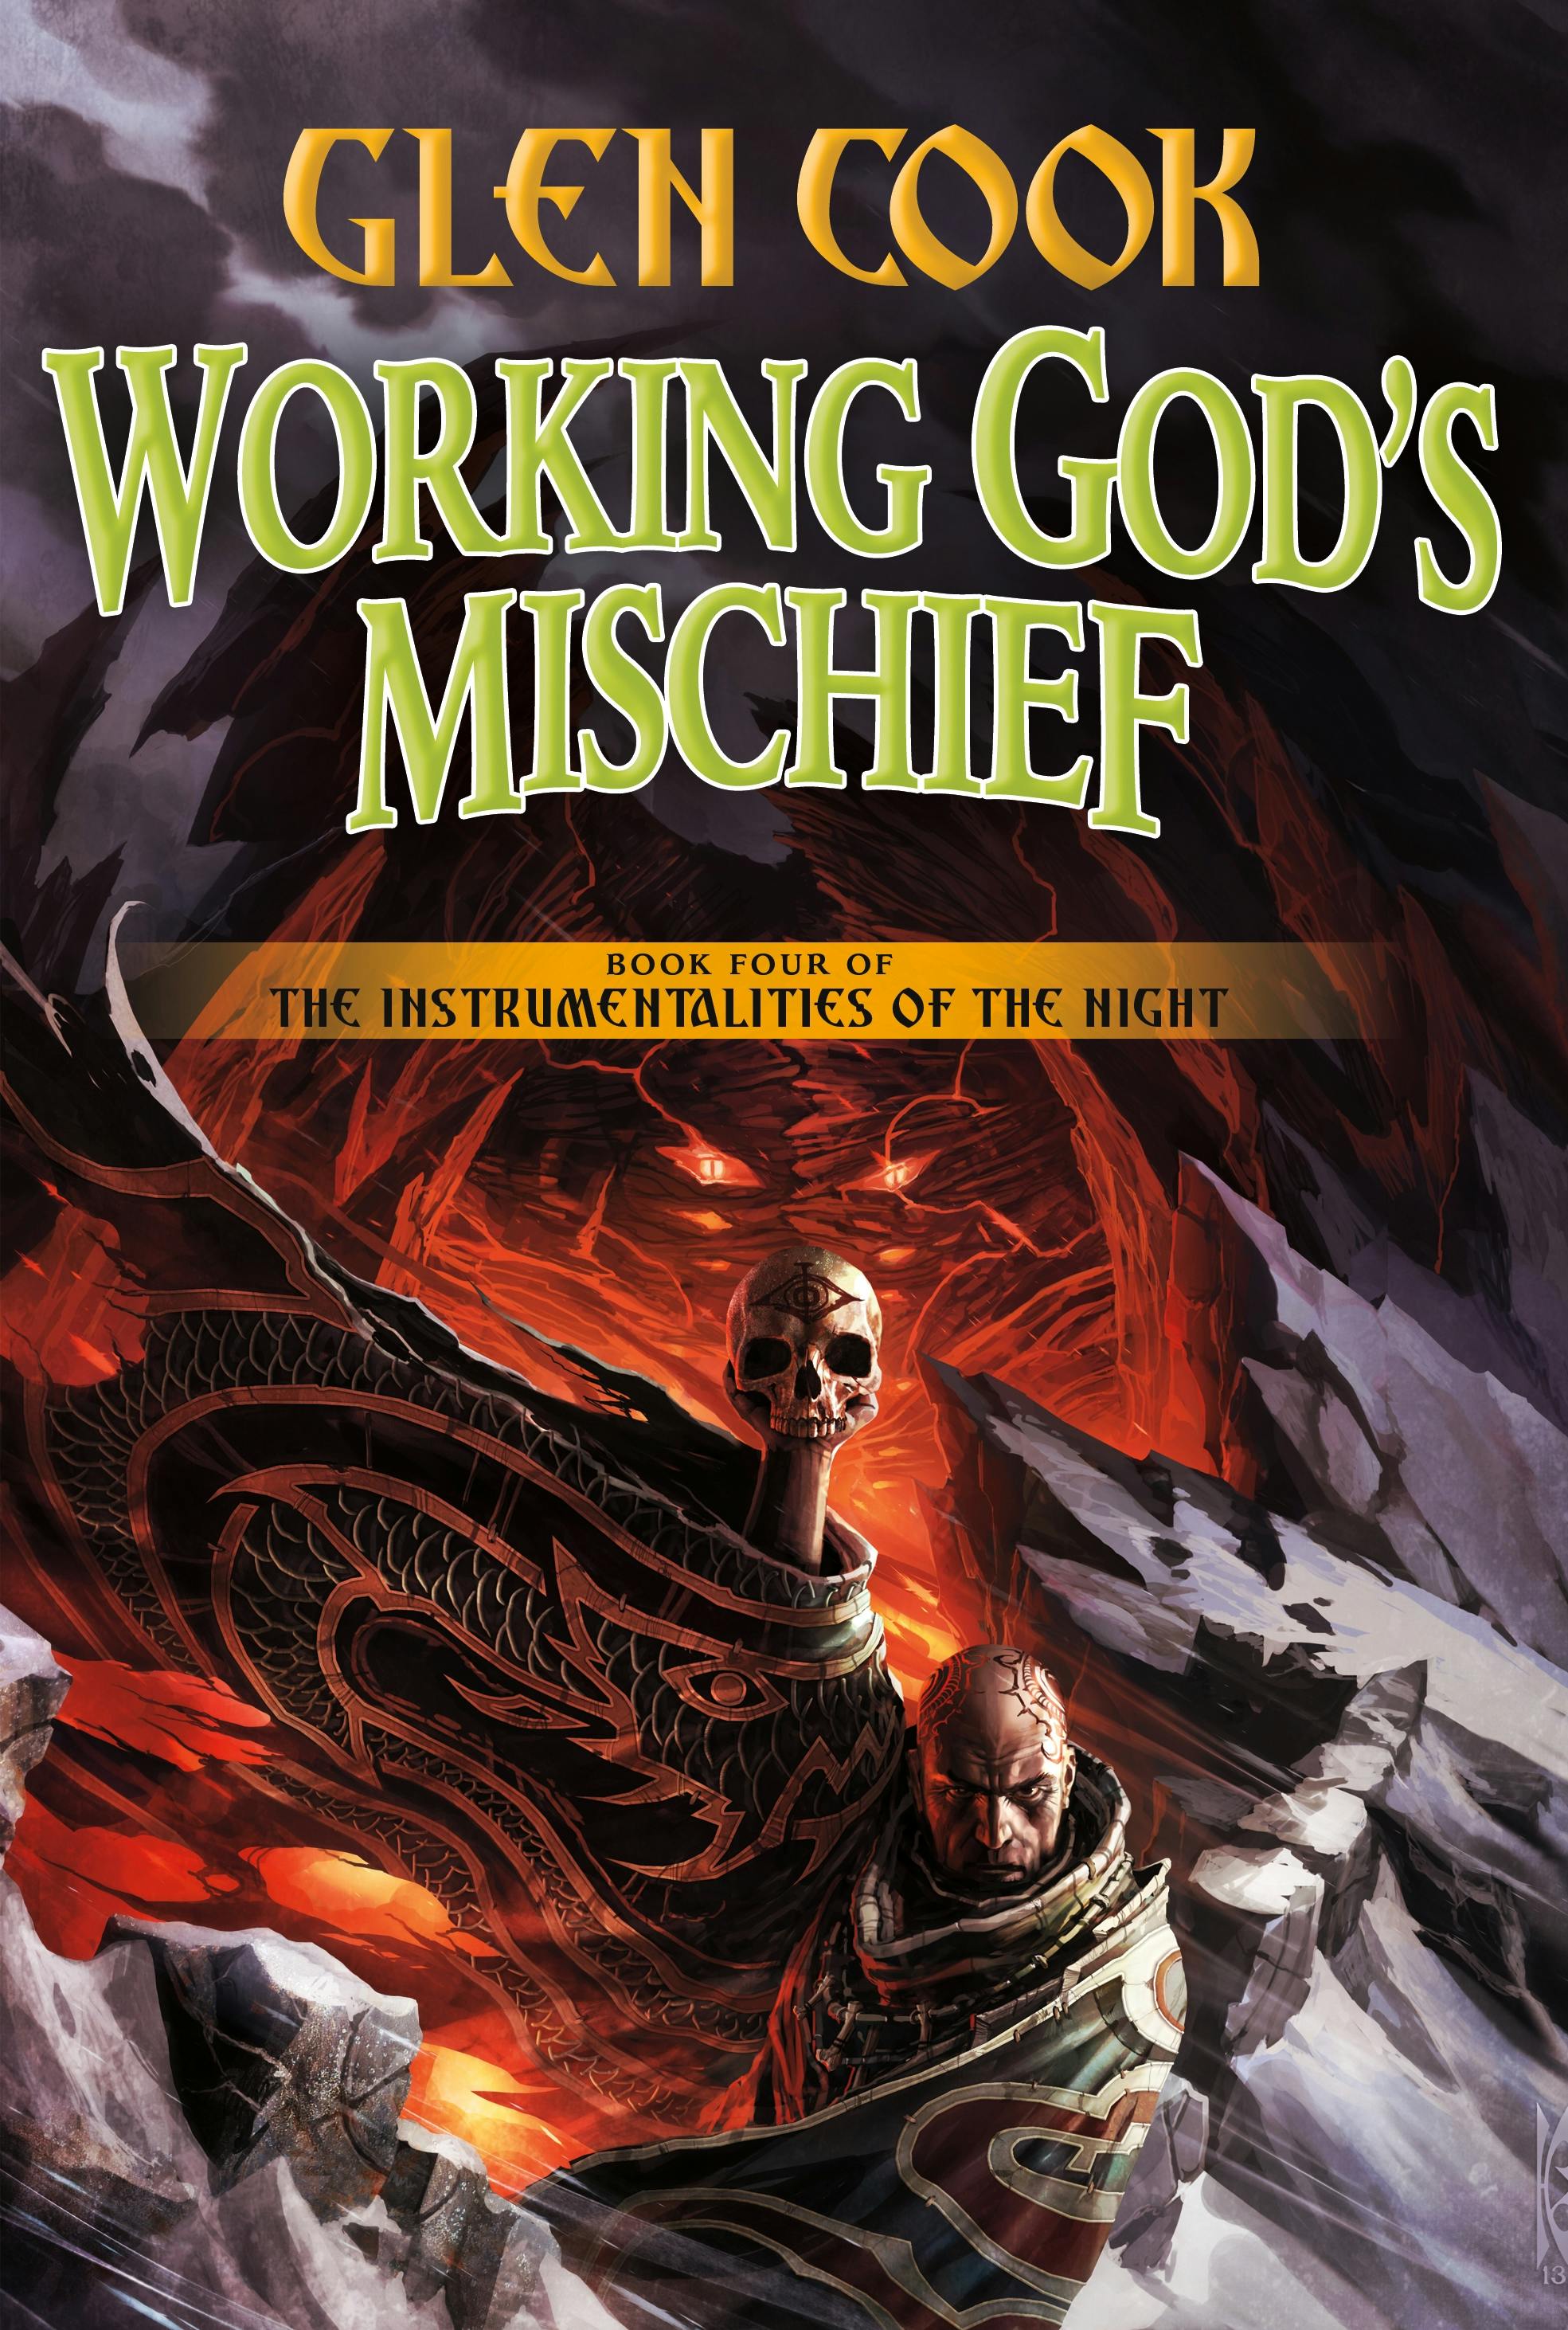 Cover for the book titled as: Working God's Mischief